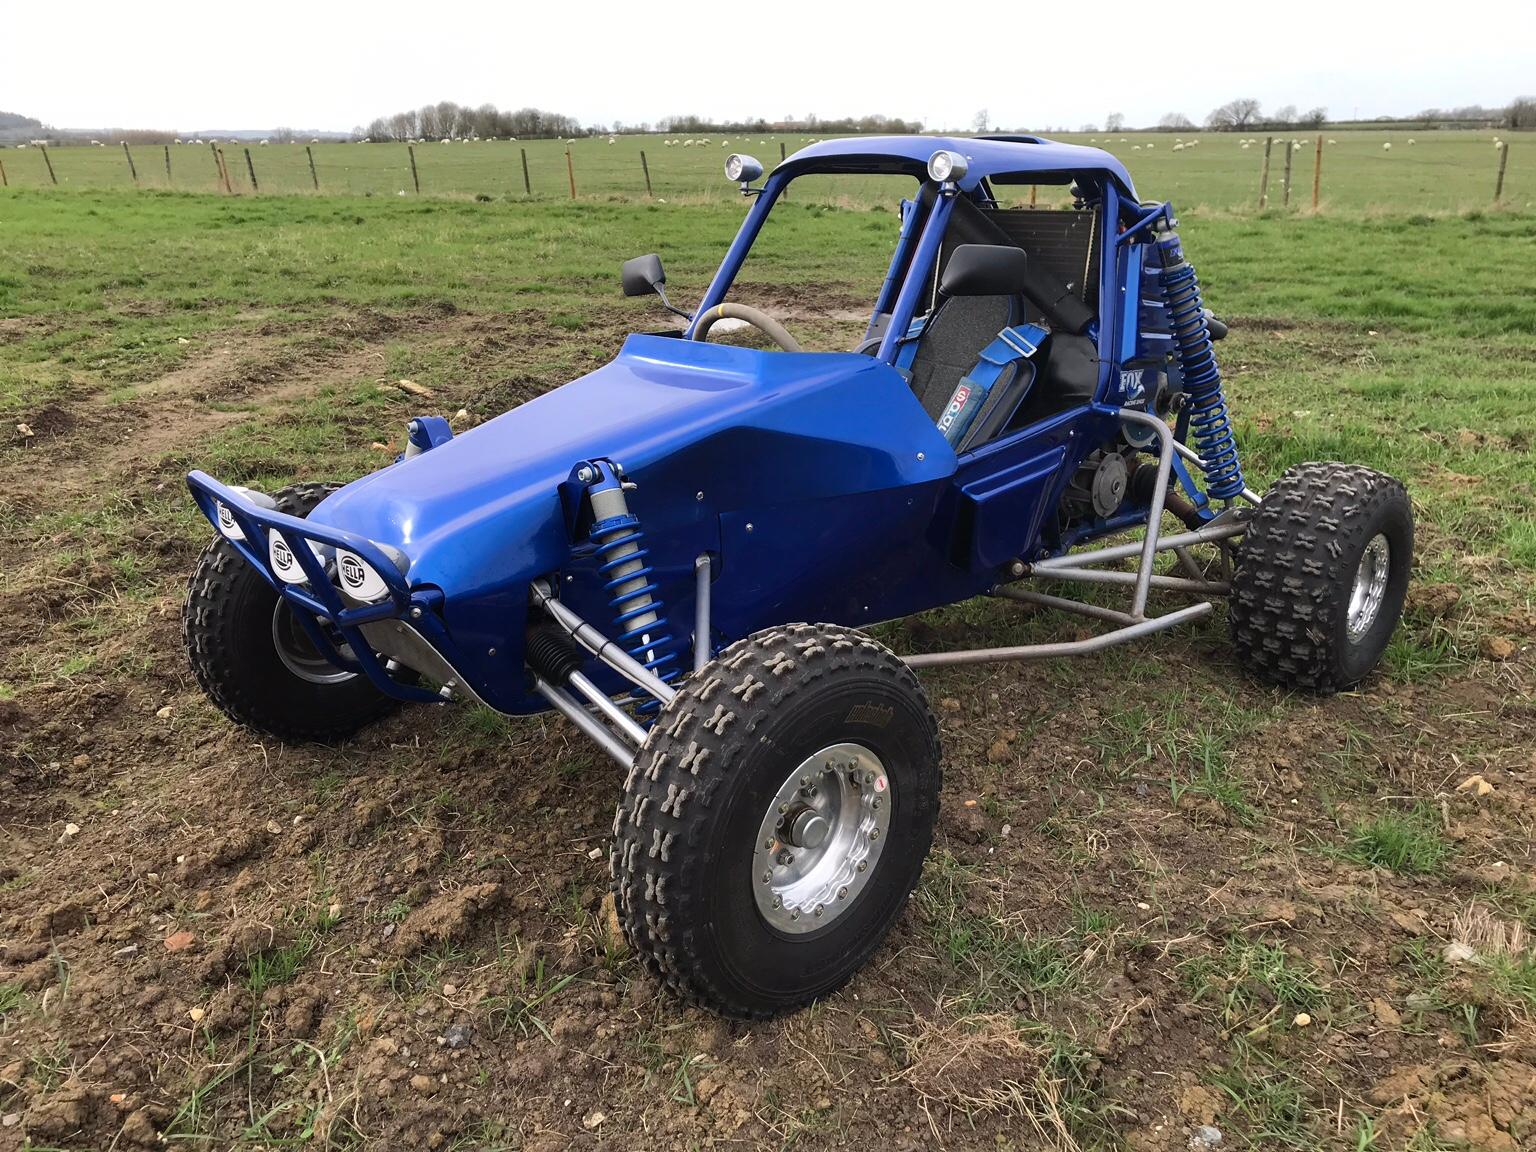 off road buggy racing near me